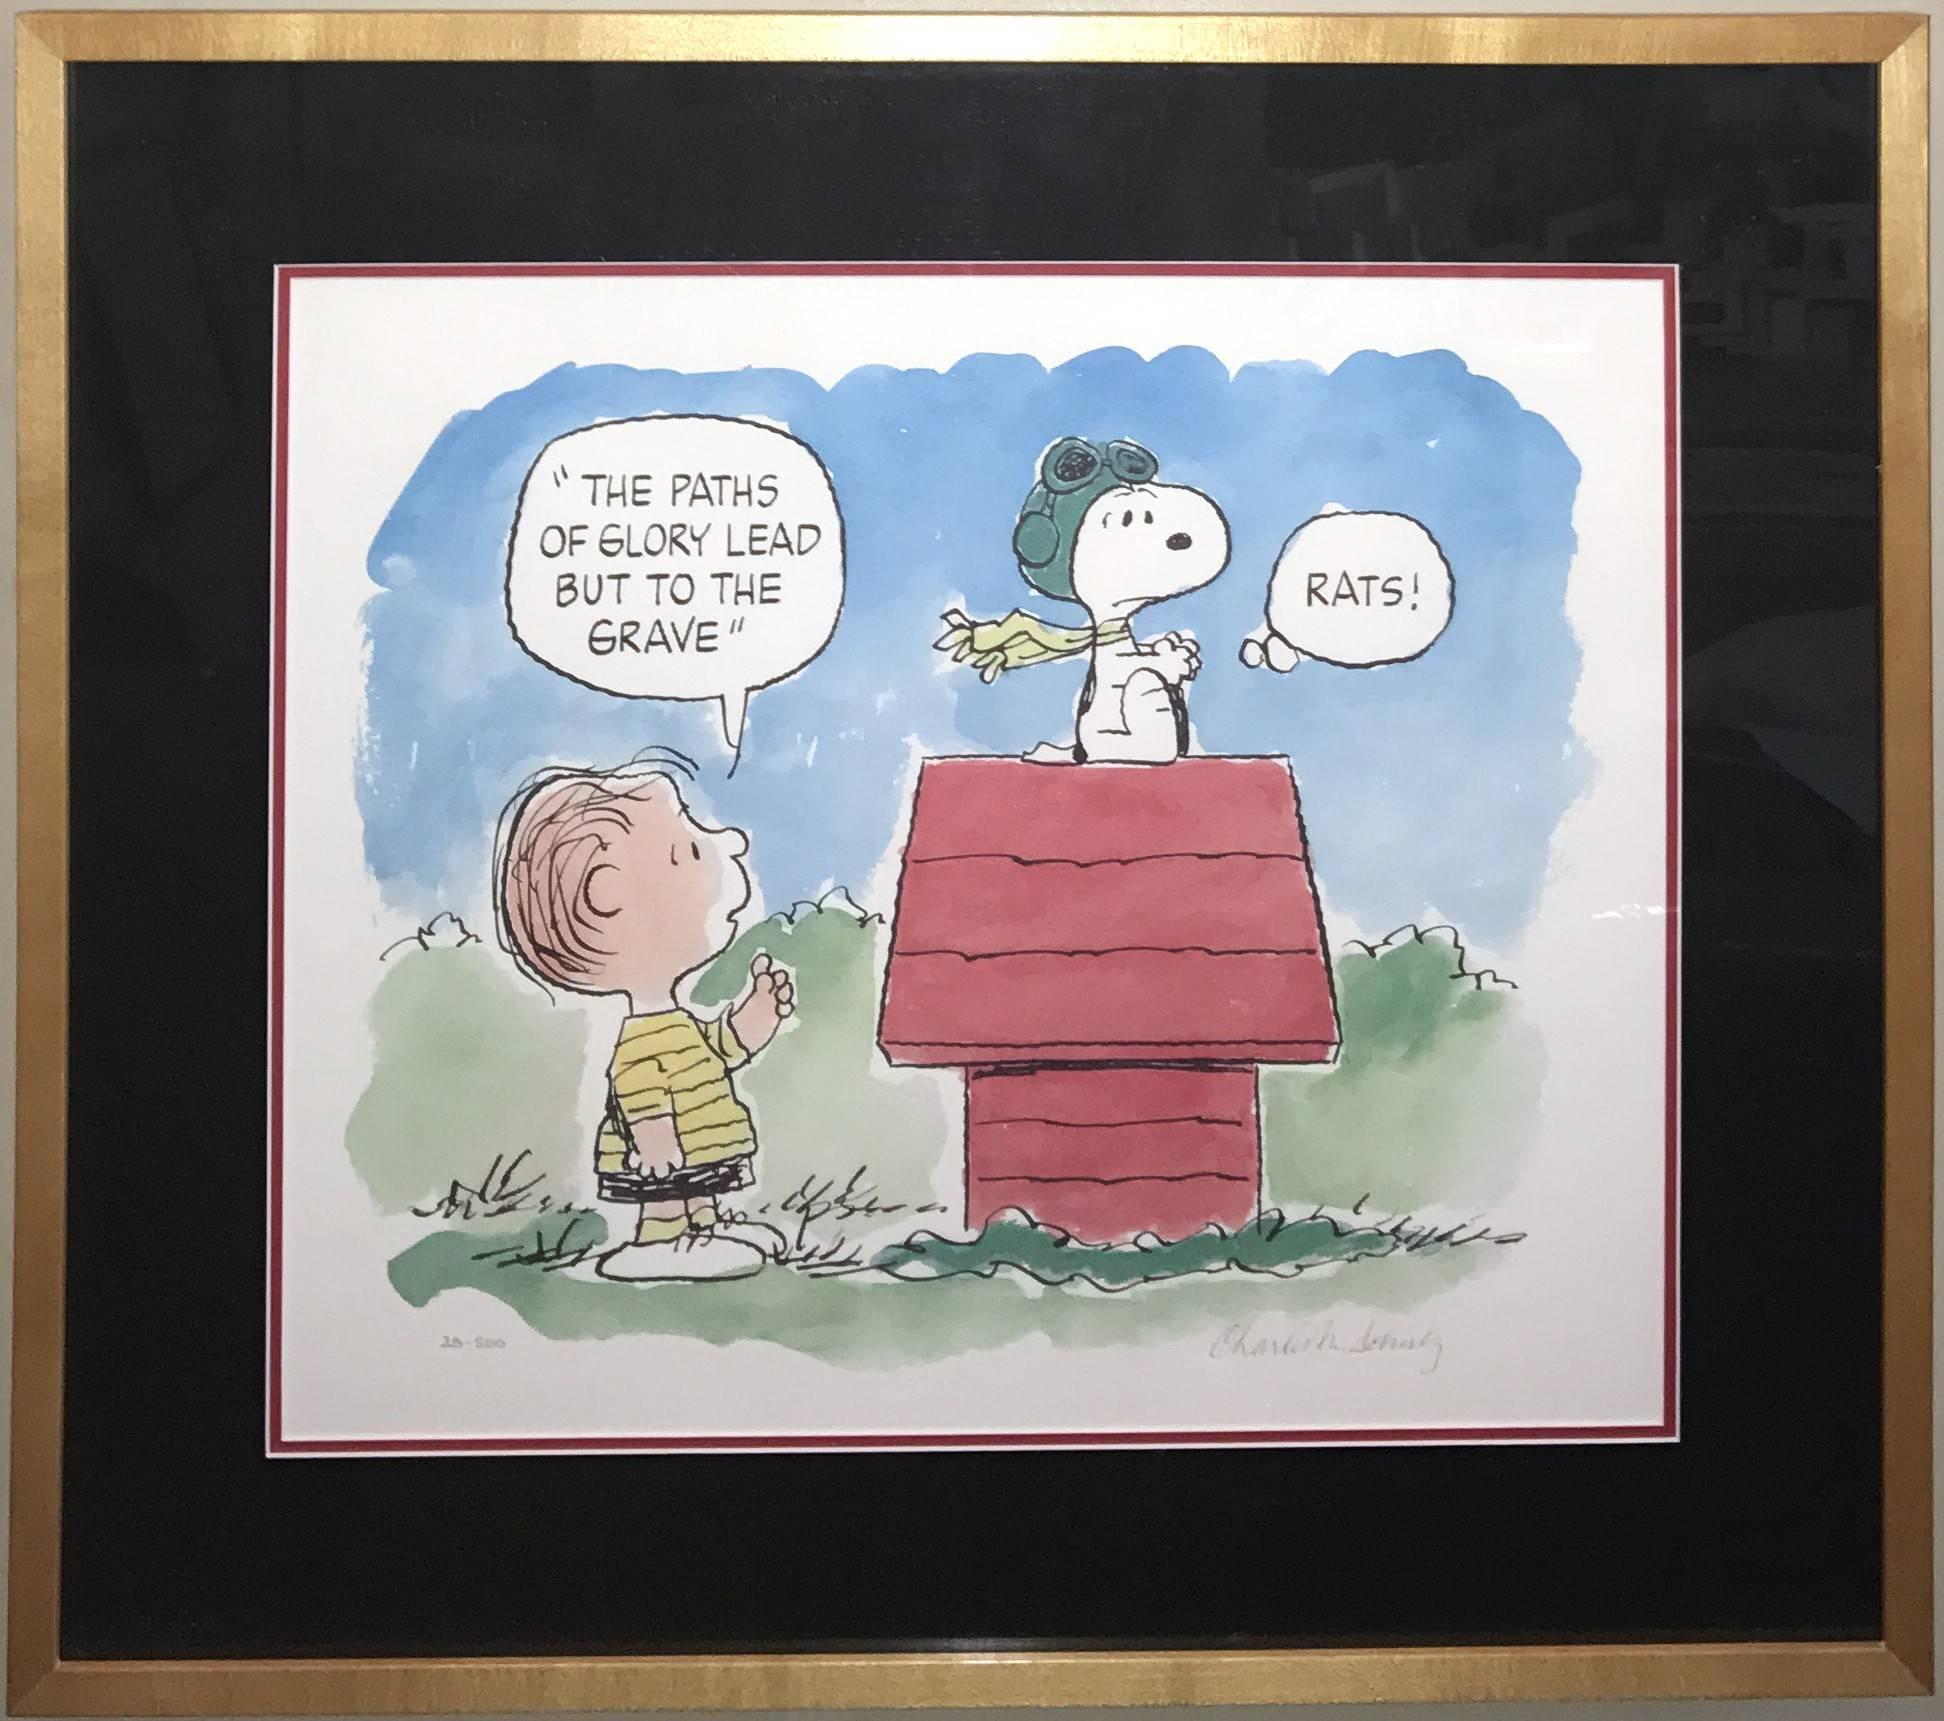 The Flying Ace - Print by Charles M. Schulz